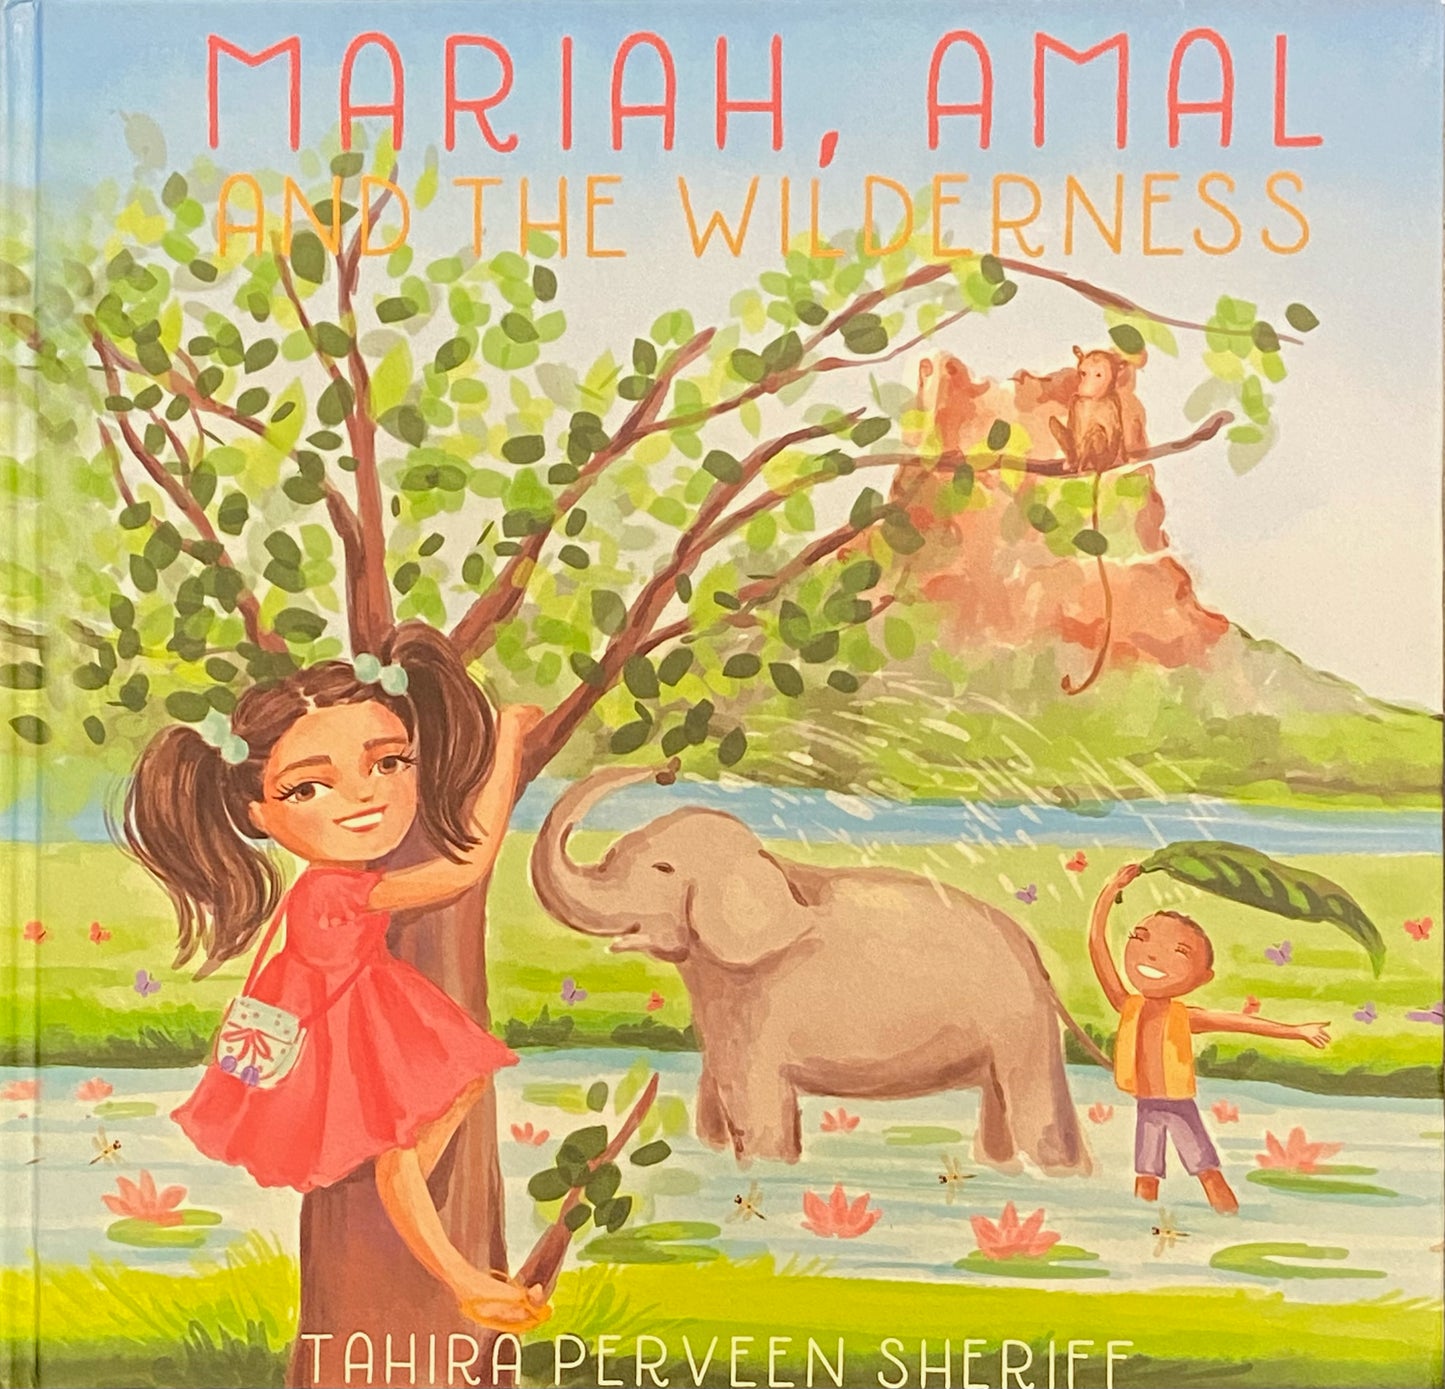 Mariah, Amal and the Wilderness by Tahira Parveen Sheriff